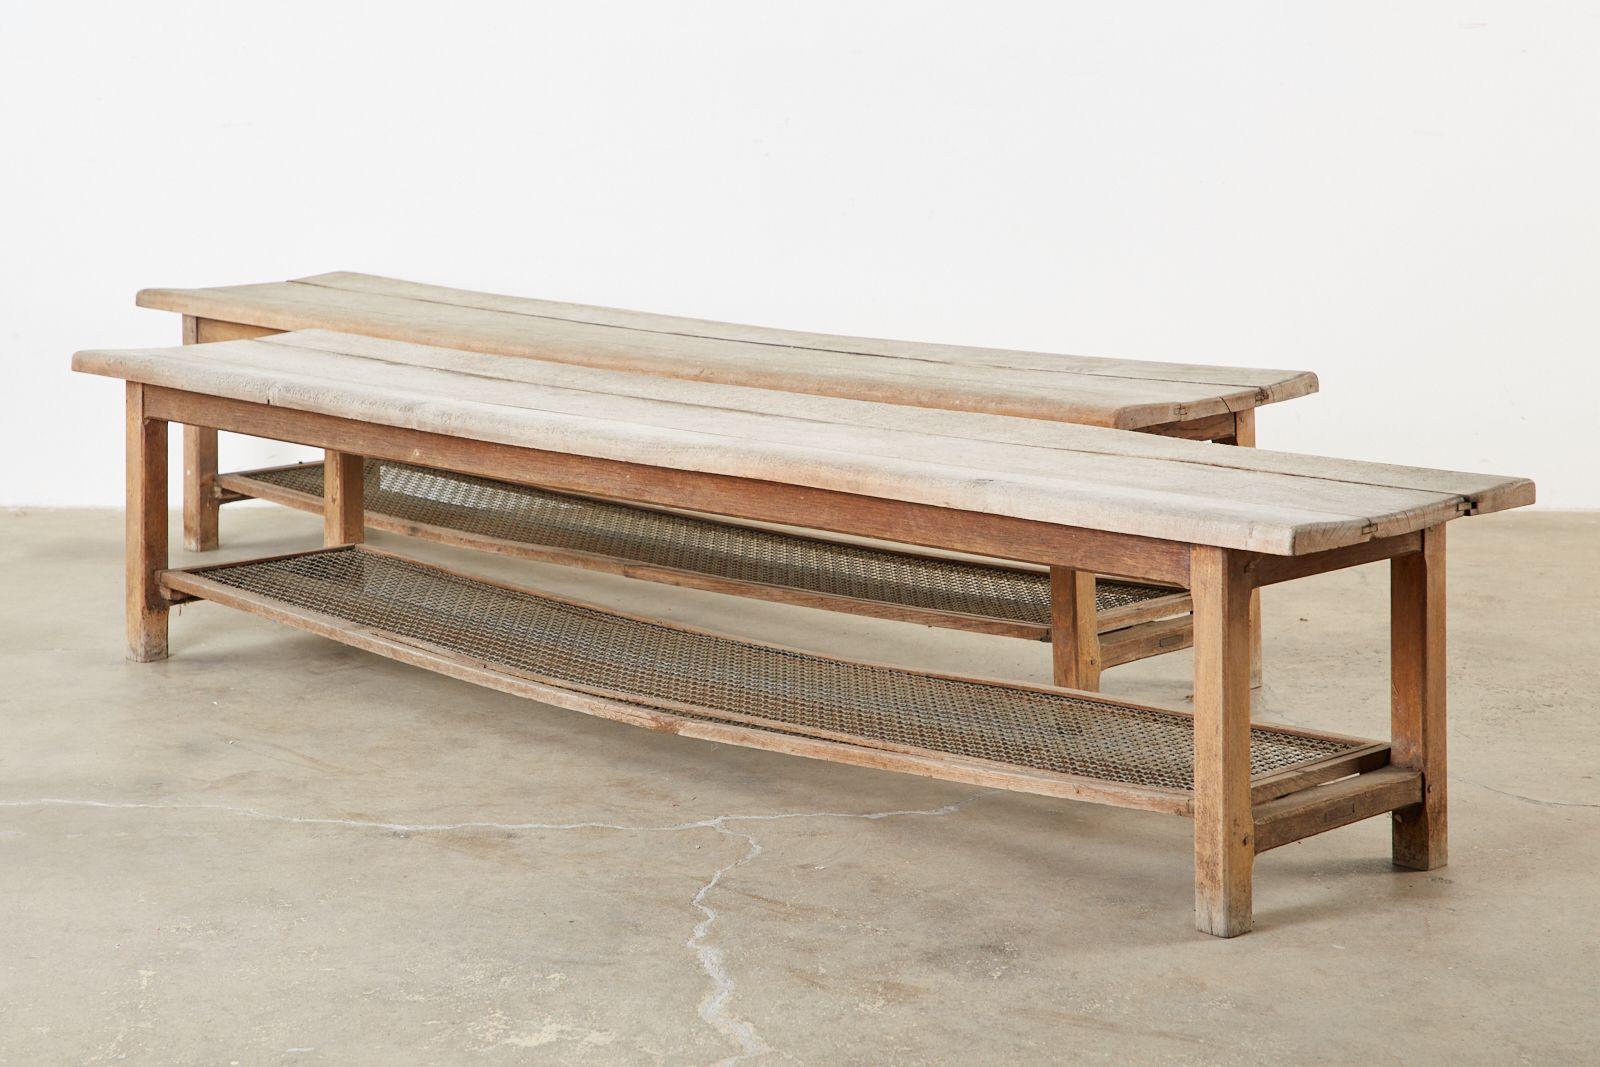 Rustic pair of American pine benches featuring large storage shelves below the seat. The generous seats are crafted from thick 1 inch pine planks with tongue in groove joinery. The seat is supported by square chamfered legs conjoined by long